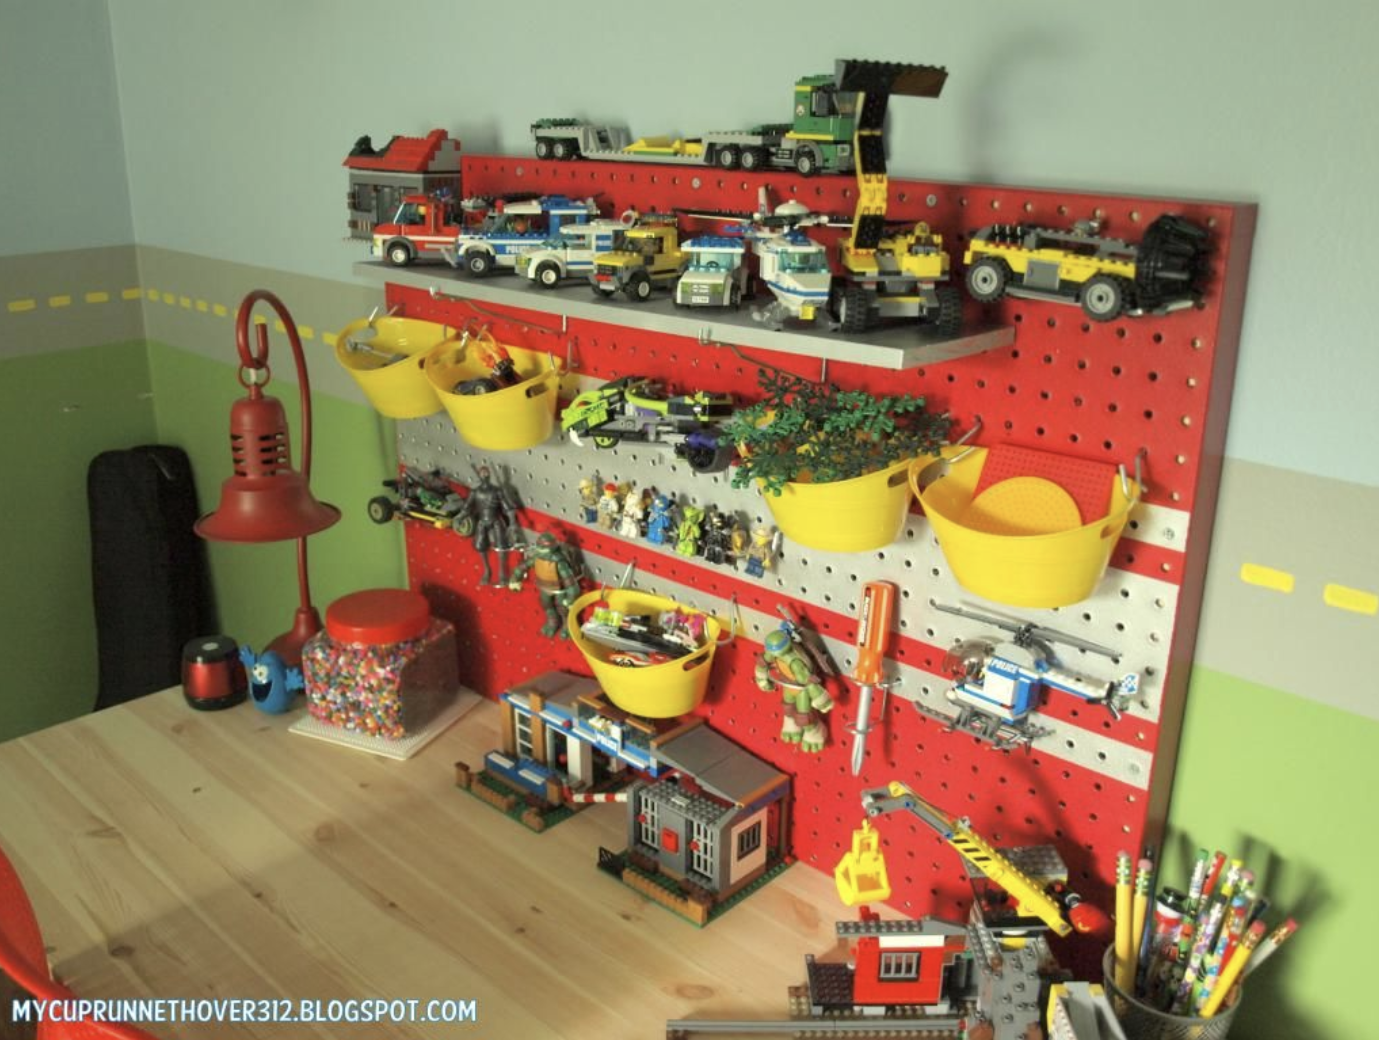 Toys kept organized on a pegboard.